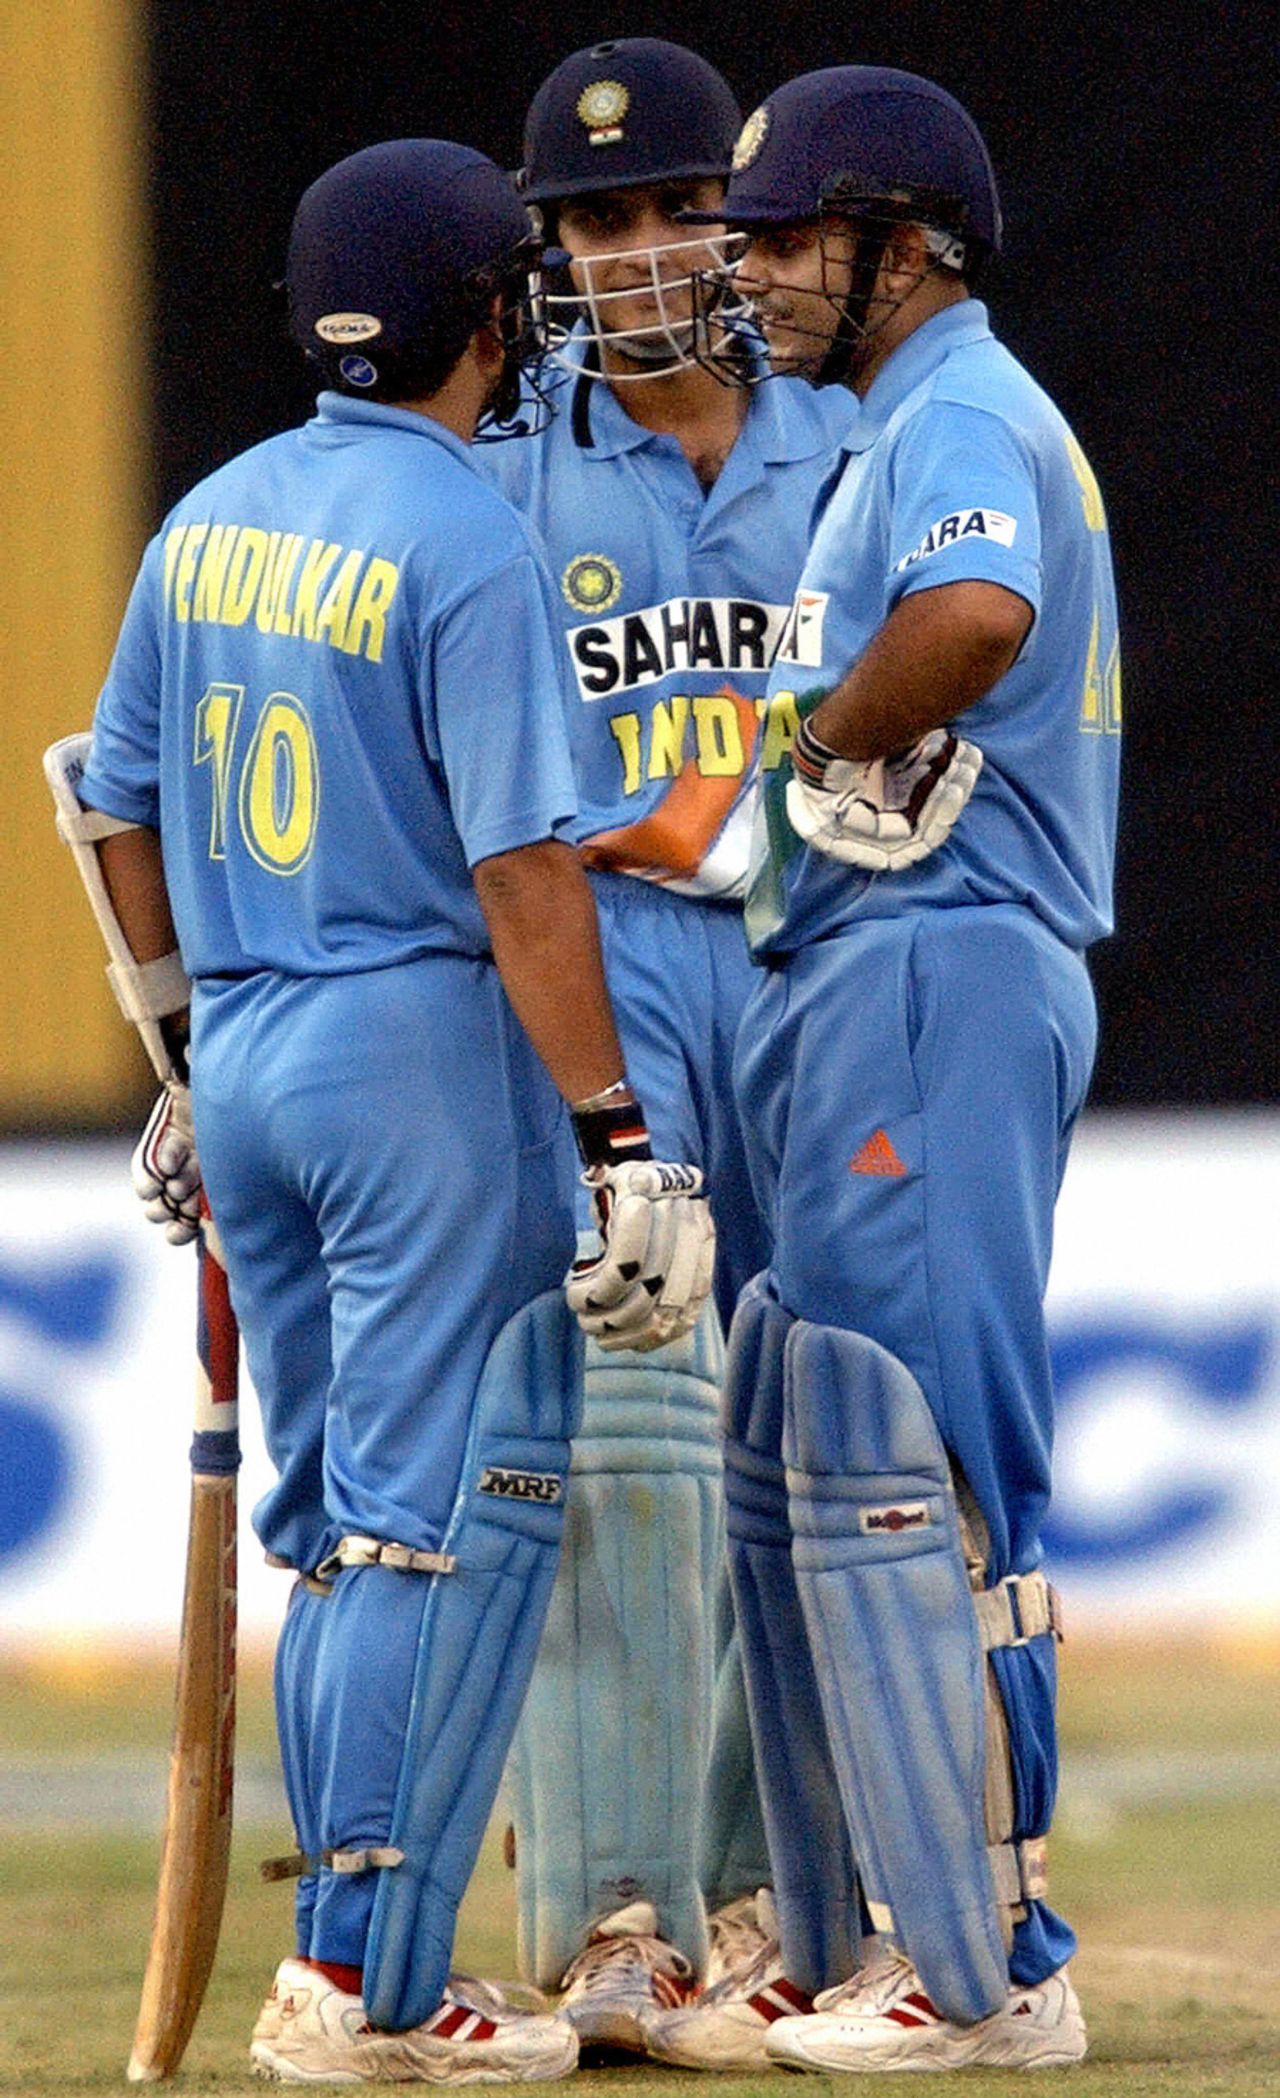 Sachin Tendulkar, Sourav Ganguly and Virender Sehwag have a discussion, India v New Zealand, TVS Cup, Hyderabad, November 15, 2003